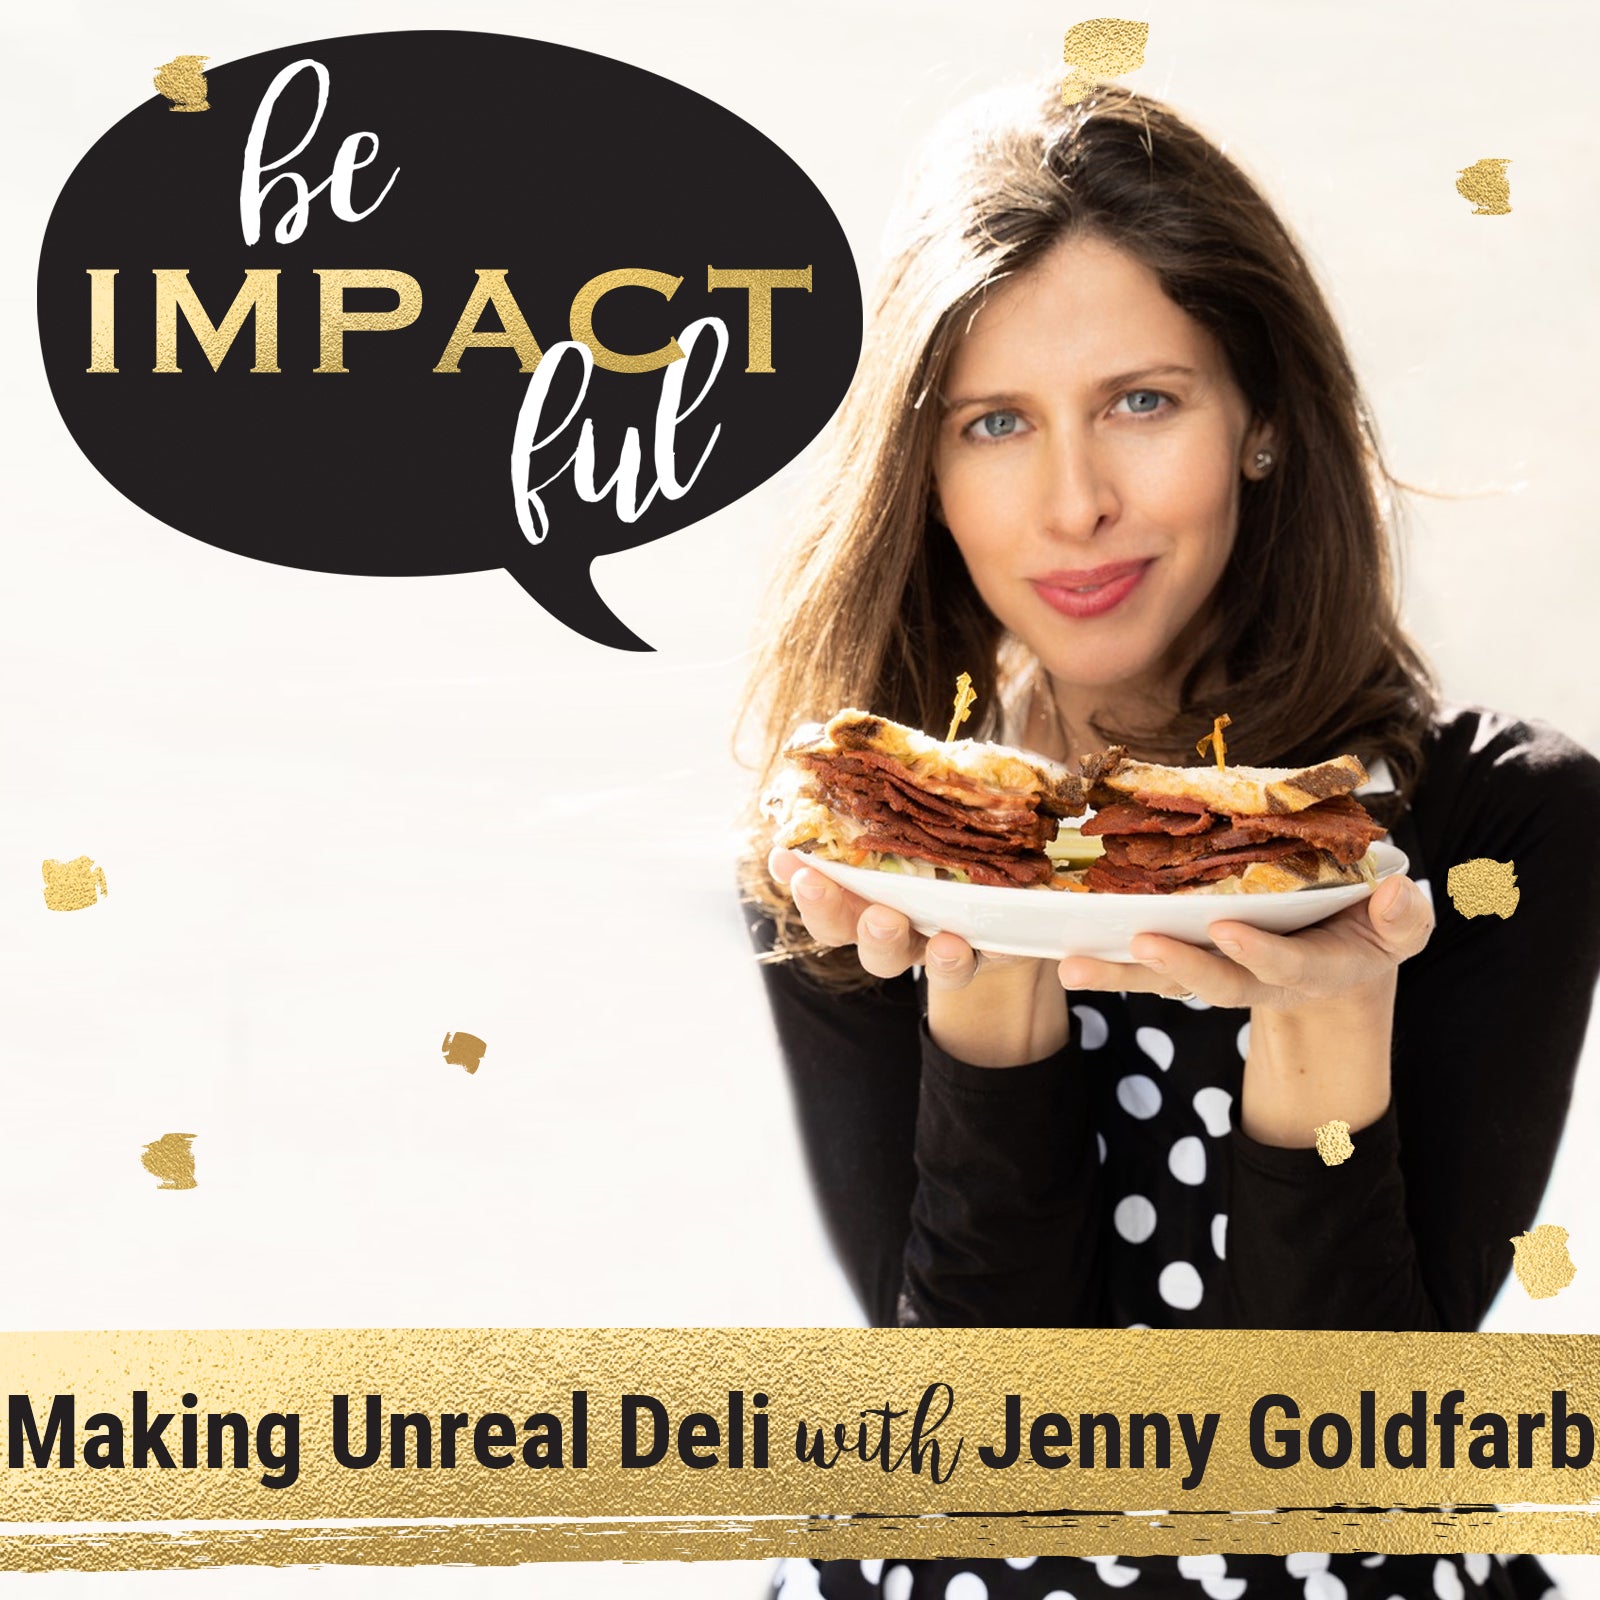 Making Unreal Deli with Jenny Goldfarb